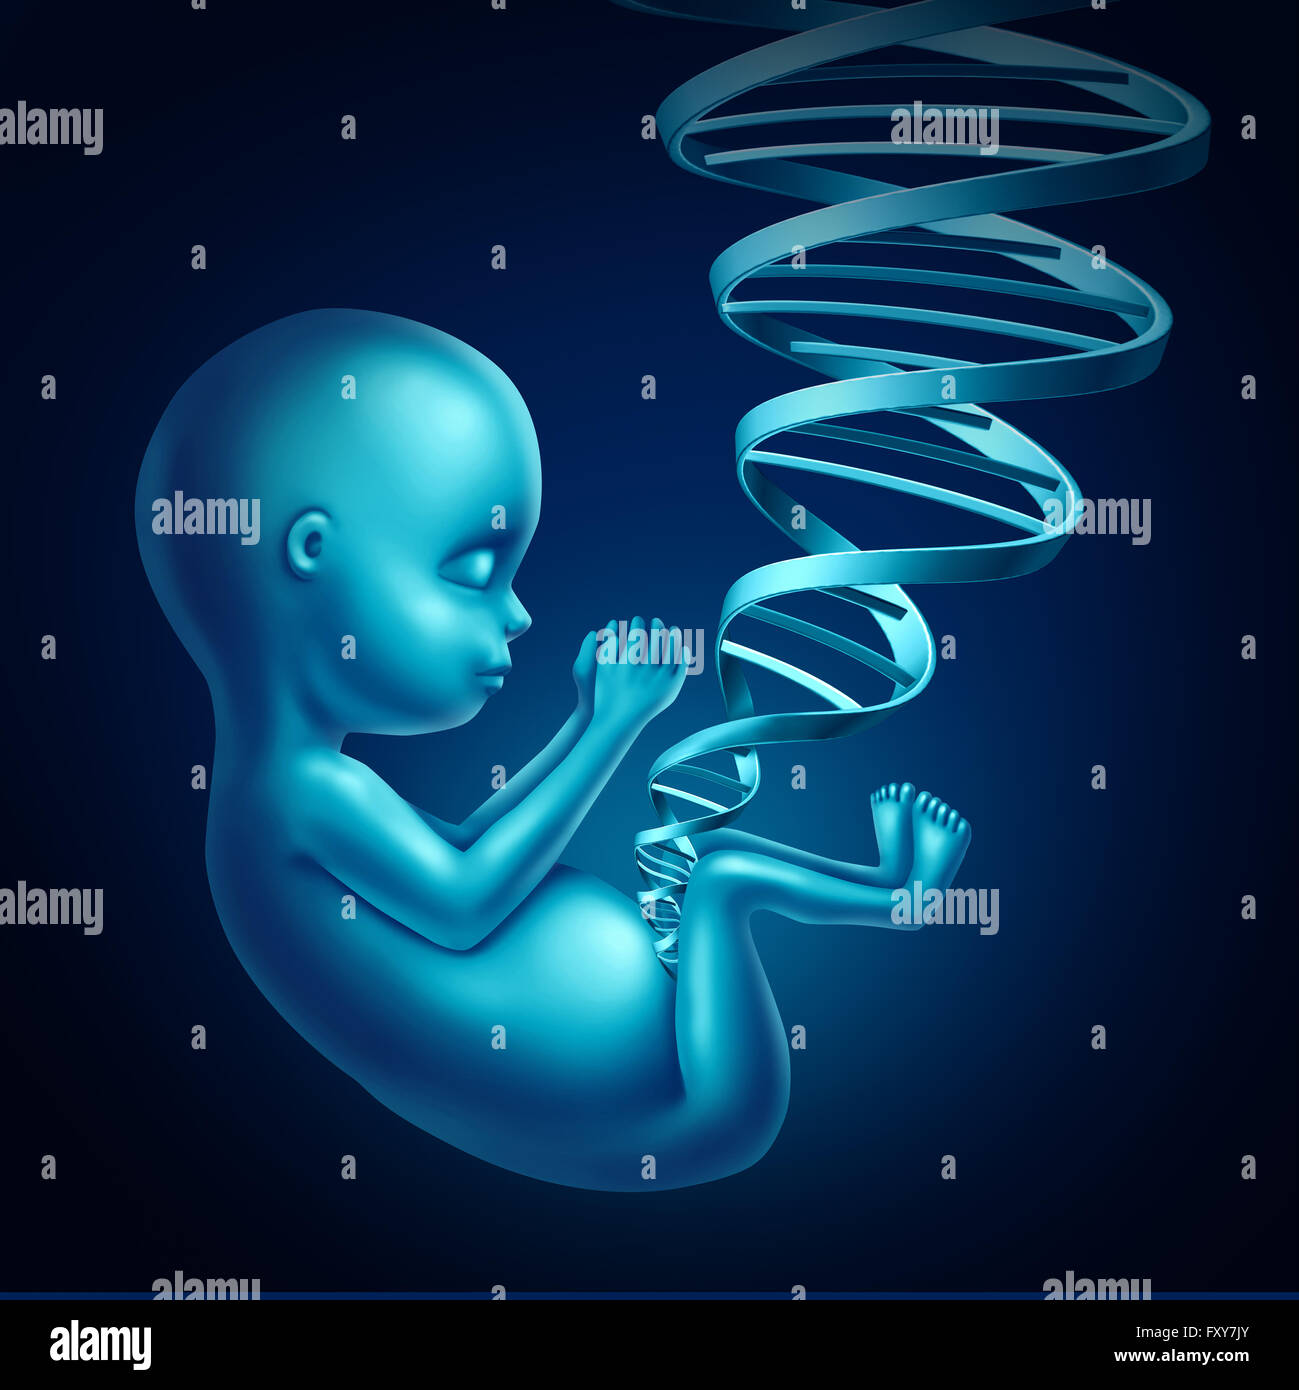 Fetus Dna Medical Concept As A Human Unborn Child Inside A Pregnant